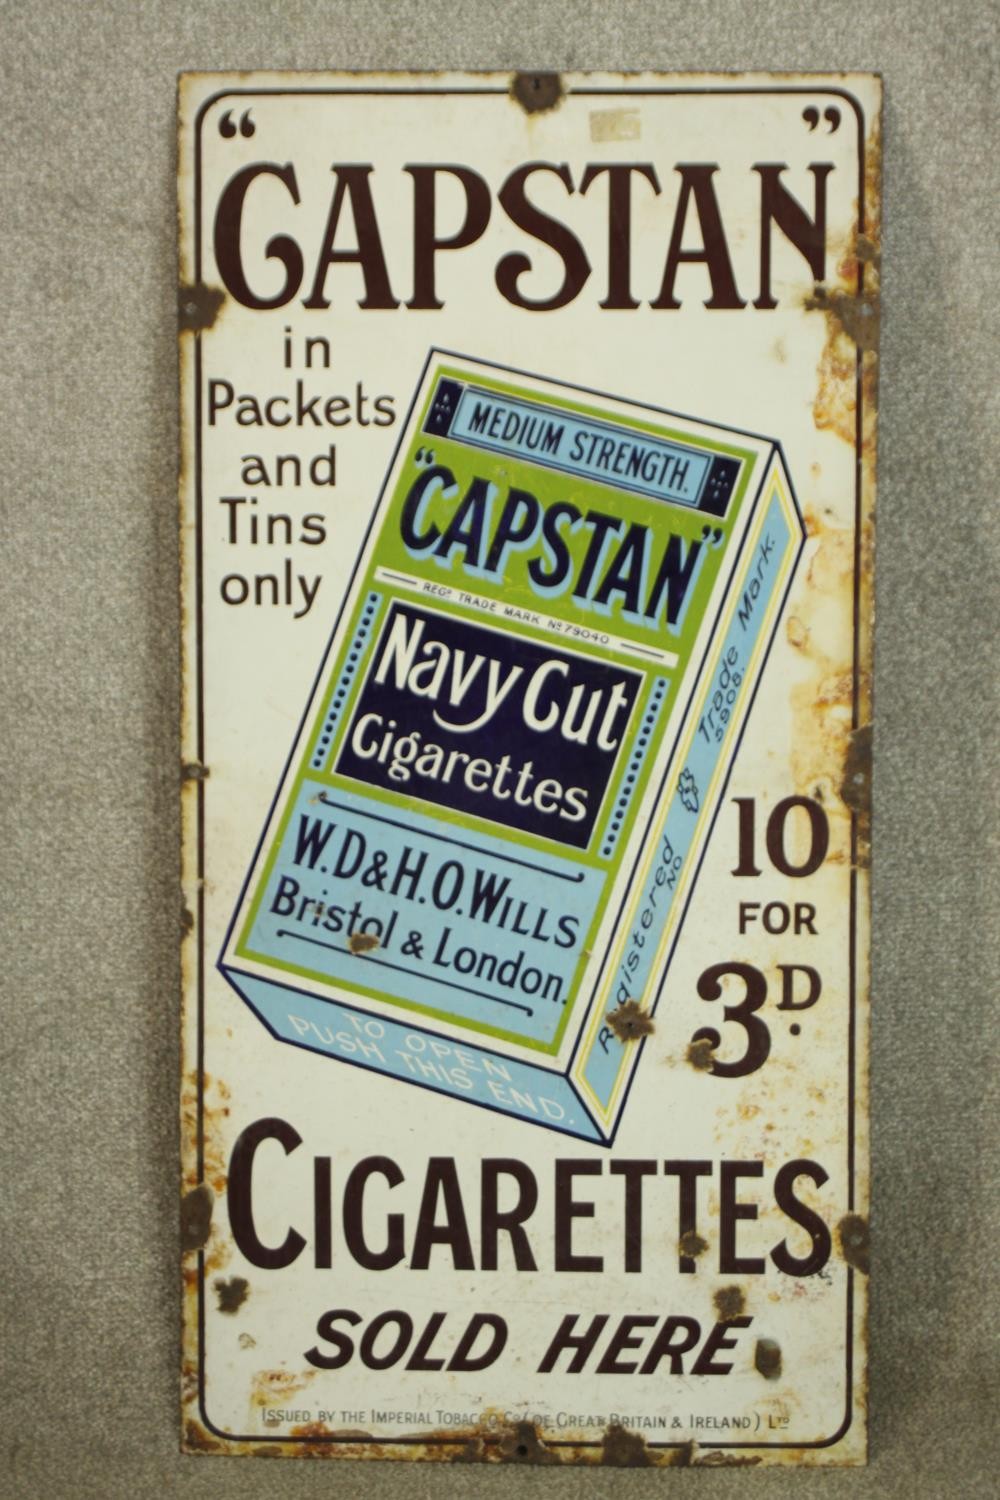 Capstan Cigarettes. Enamelled cigarette advertising sign on metal. 'Capstan In Packets and Tin